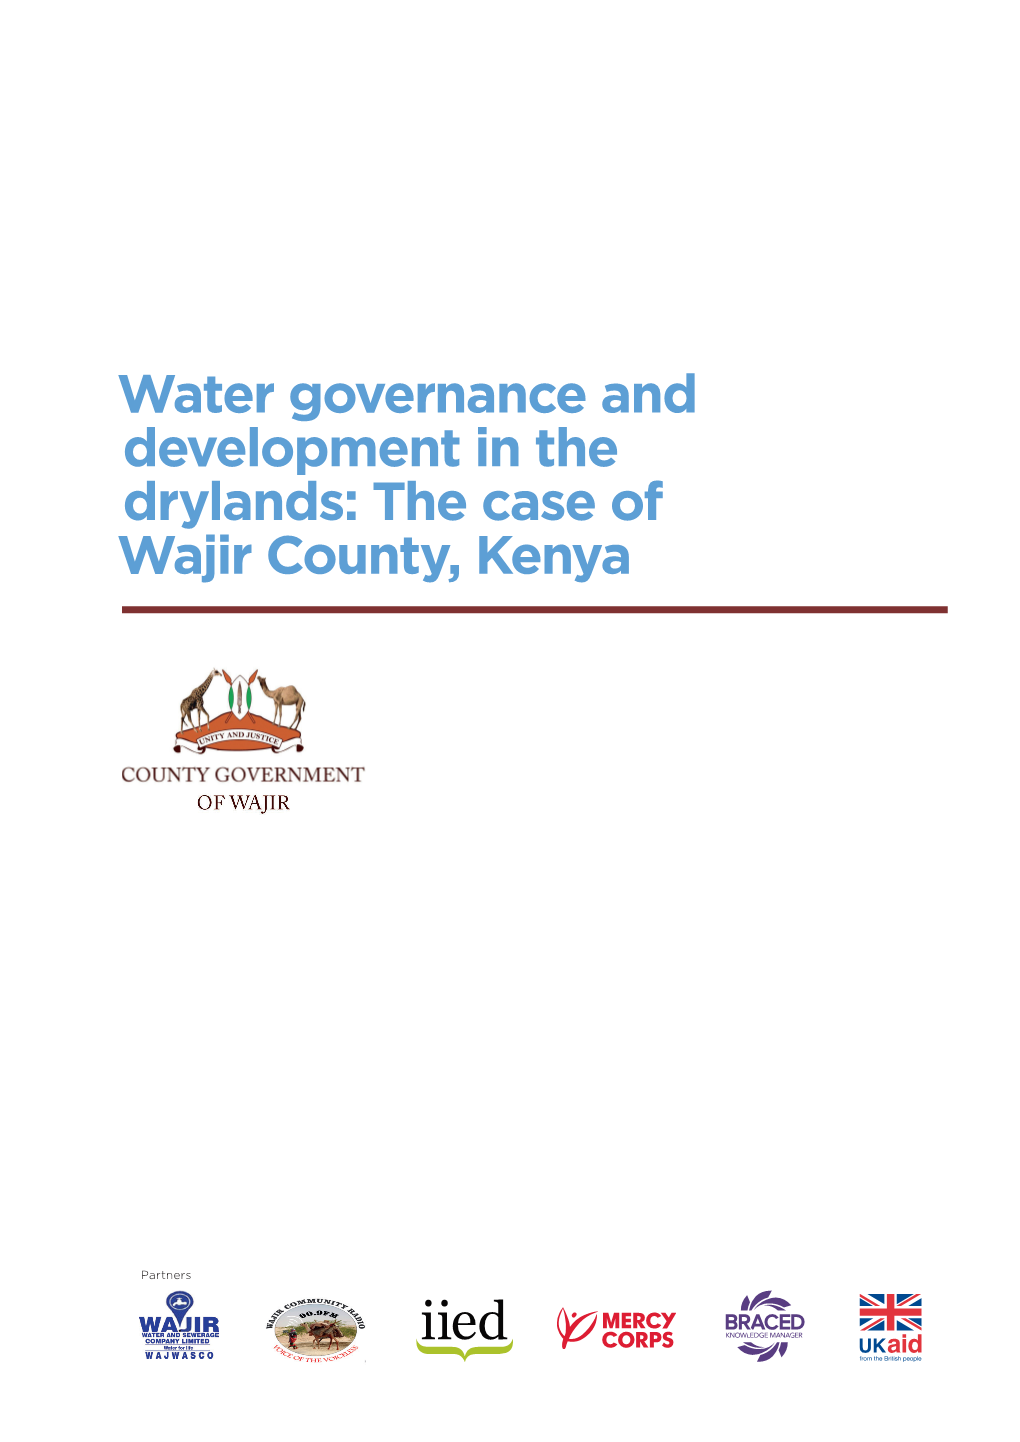 Water Governance and Development in the Drylands: the Case of Wajir County, Kenya